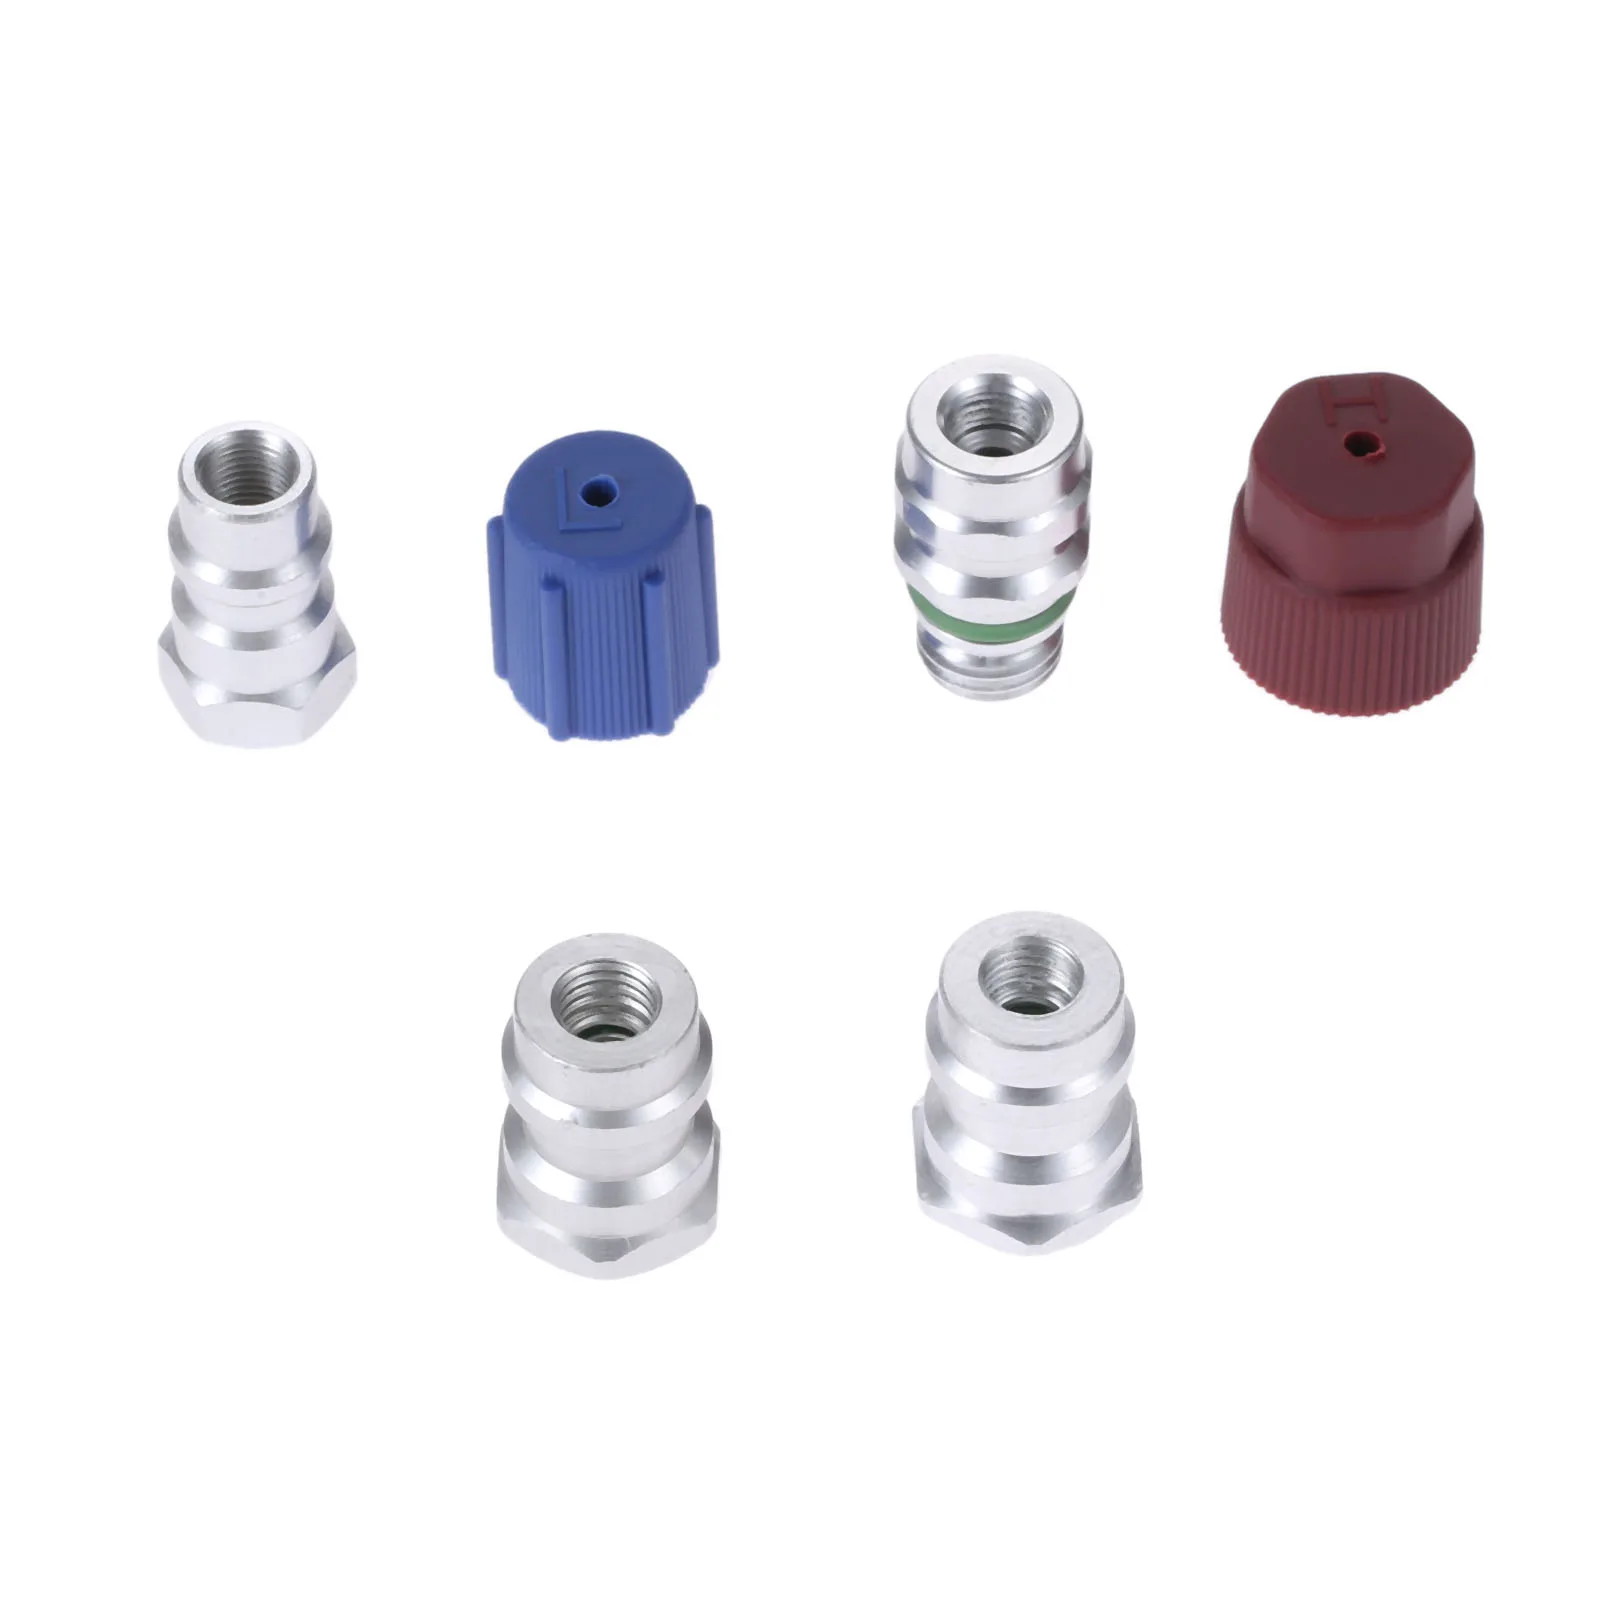 Yetaha R12 R22 Port To R134a Straight Adapters With Valve Core & Service Port Caps Car Air Conditioning Fittings